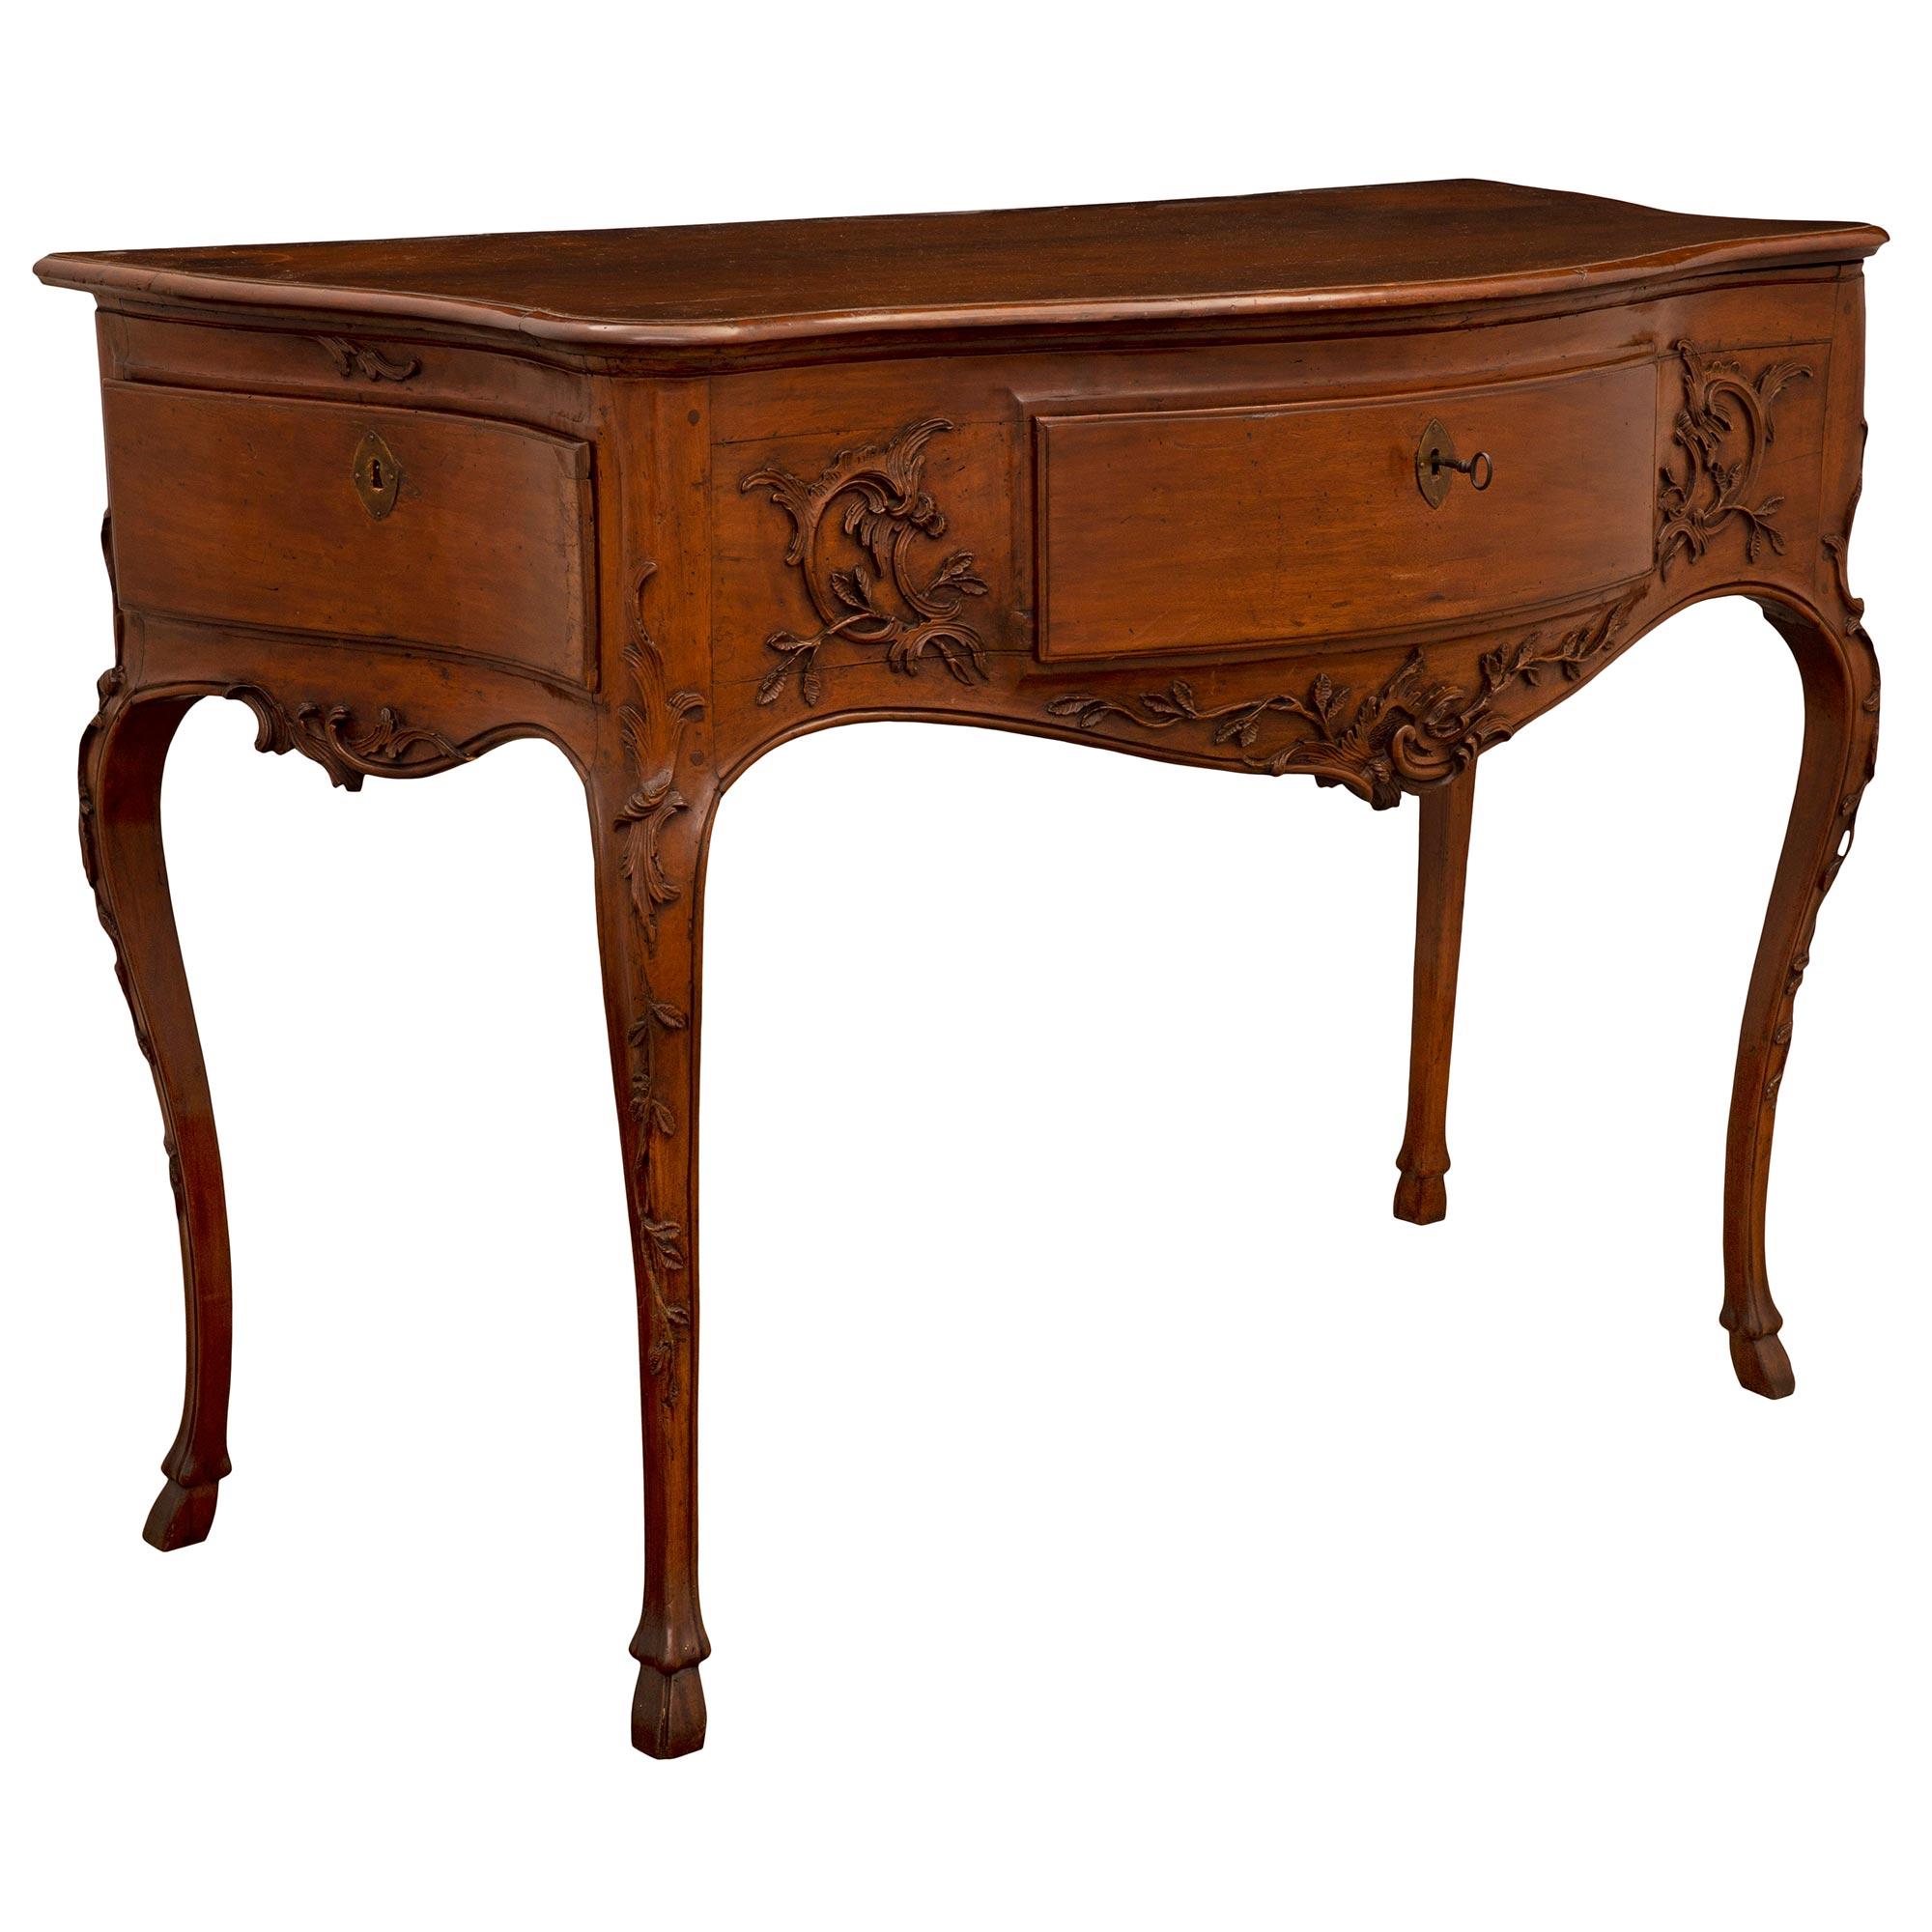 Italian Mid 18th Century Louis XV Period Walnut Console In Good Condition For Sale In West Palm Beach, FL